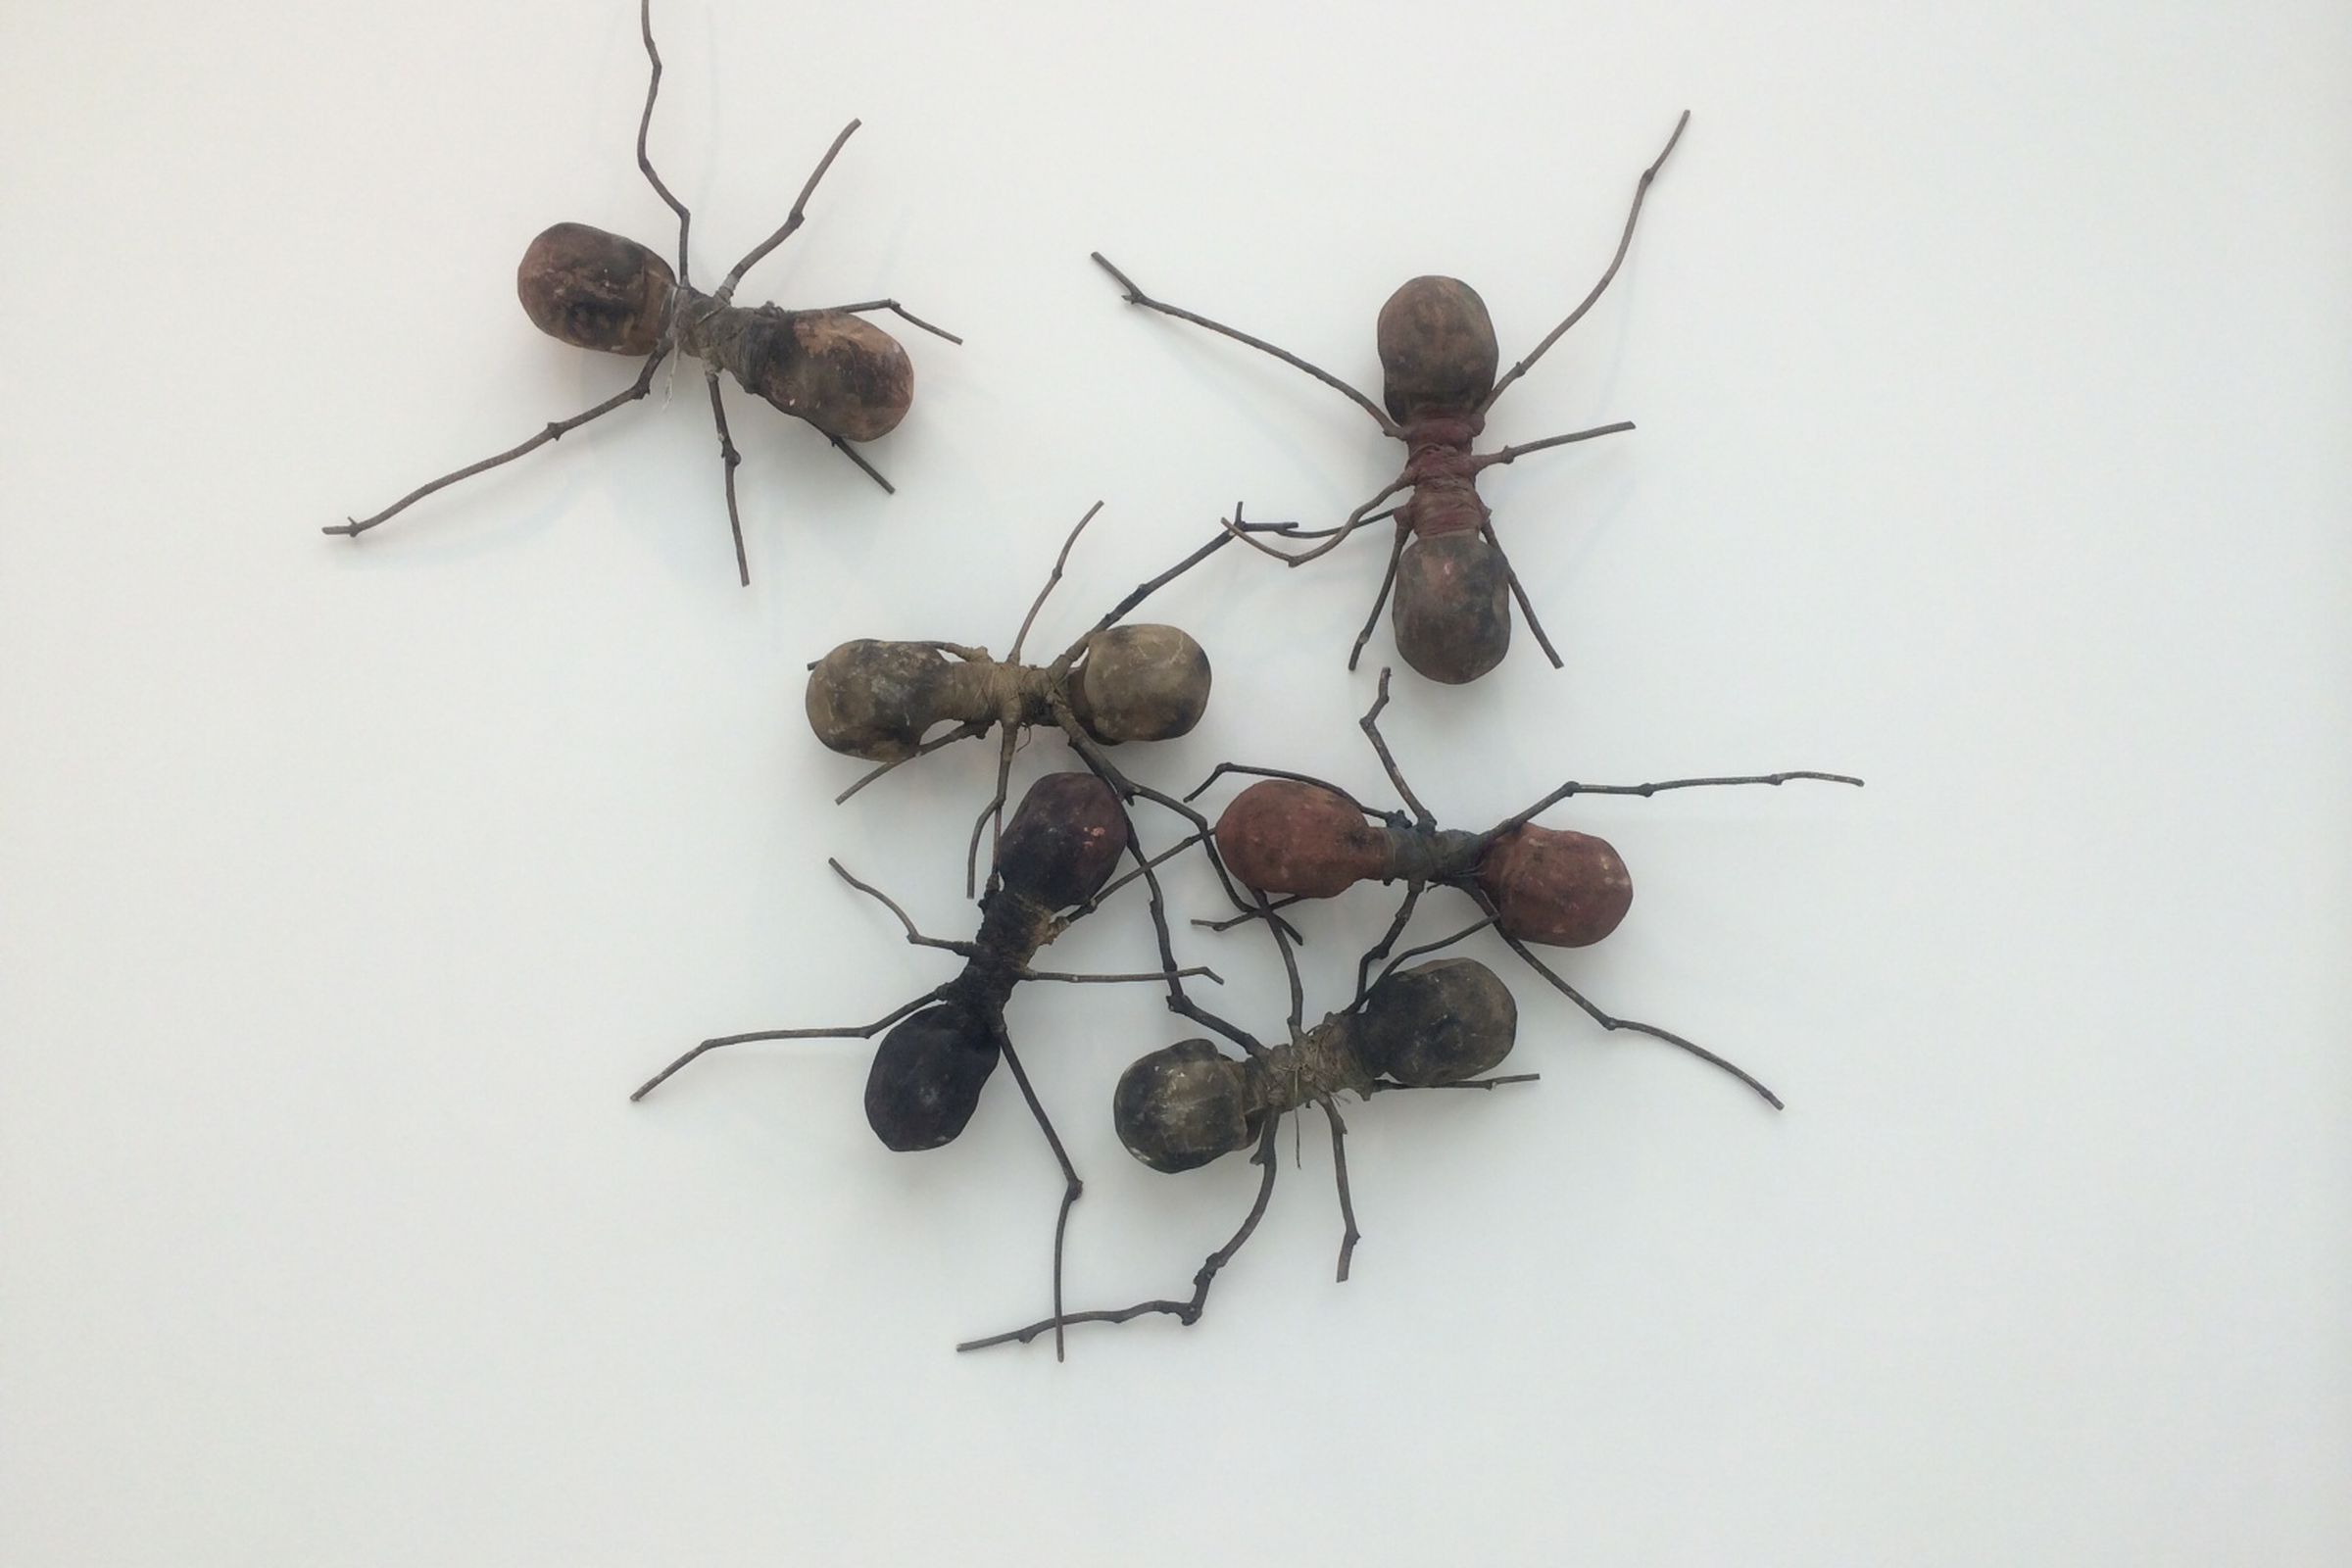 Colombia’s giant ants